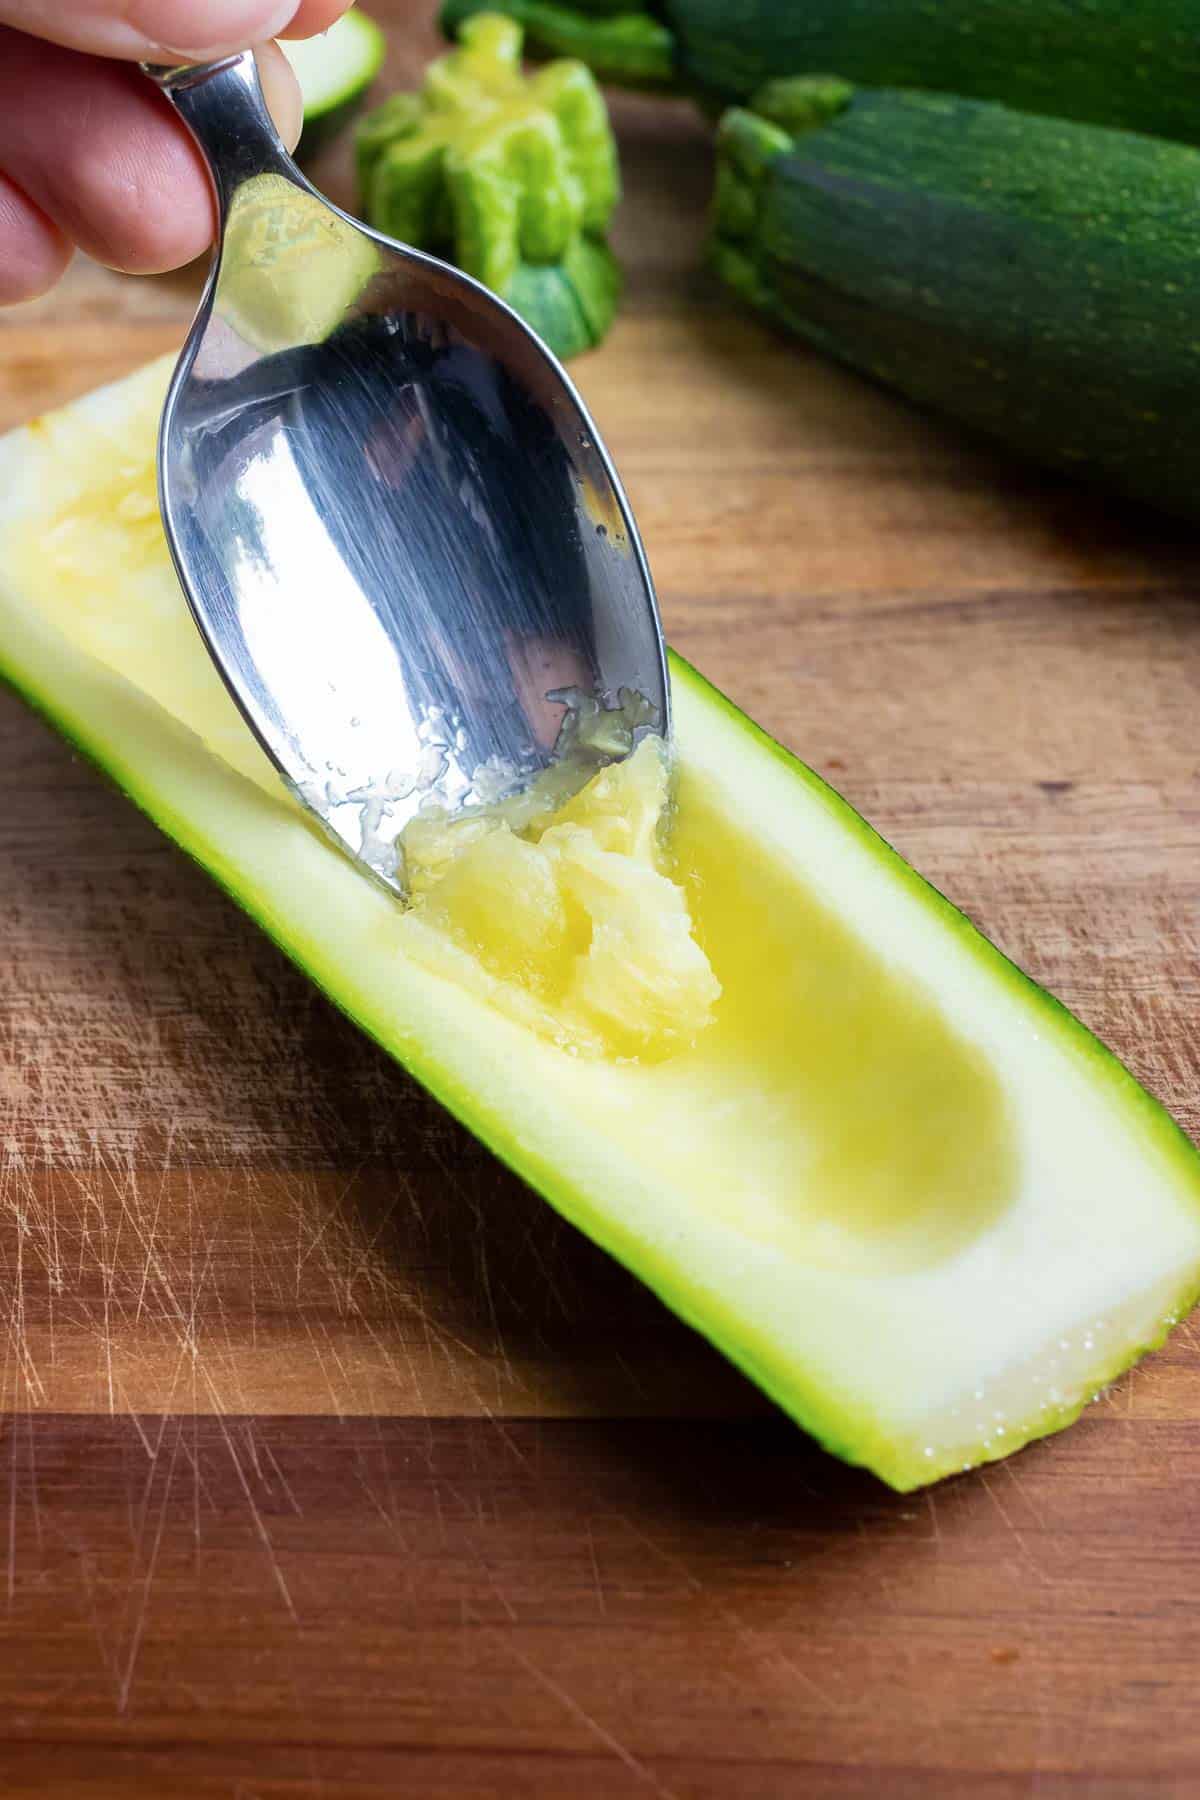 A spoon is used to scoop out some of the flesh of a zucchini.